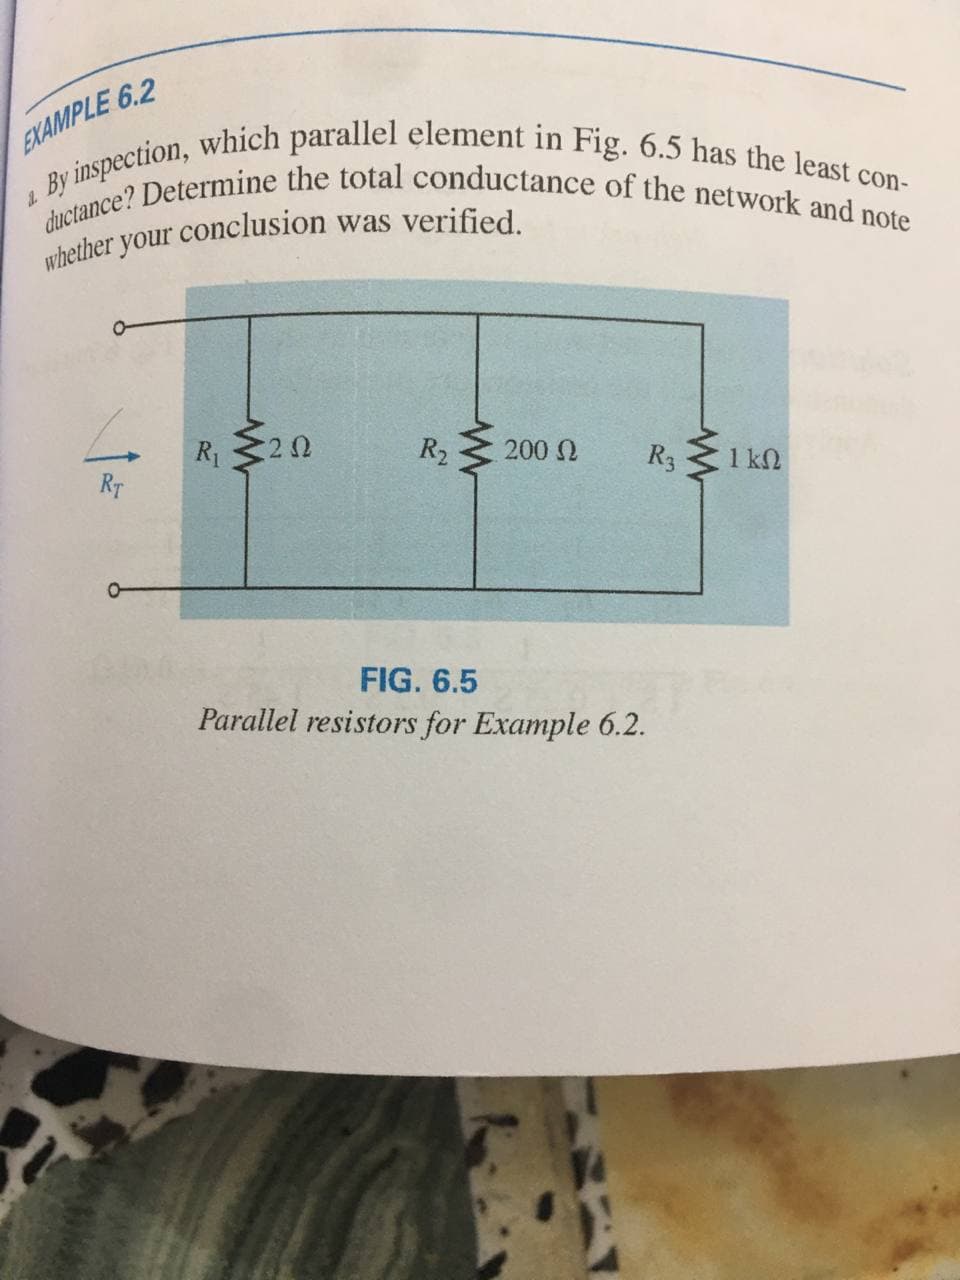 ductance? Determine the total conductance of the network and note
By inspection, which parallel element in Fig. 6.5 has the least con-
EXAMPLE 6.2
R1
R2
200 N
R3
1 kN
RT
FIG. 6.5
Parallel resistors for Example 6.2.
